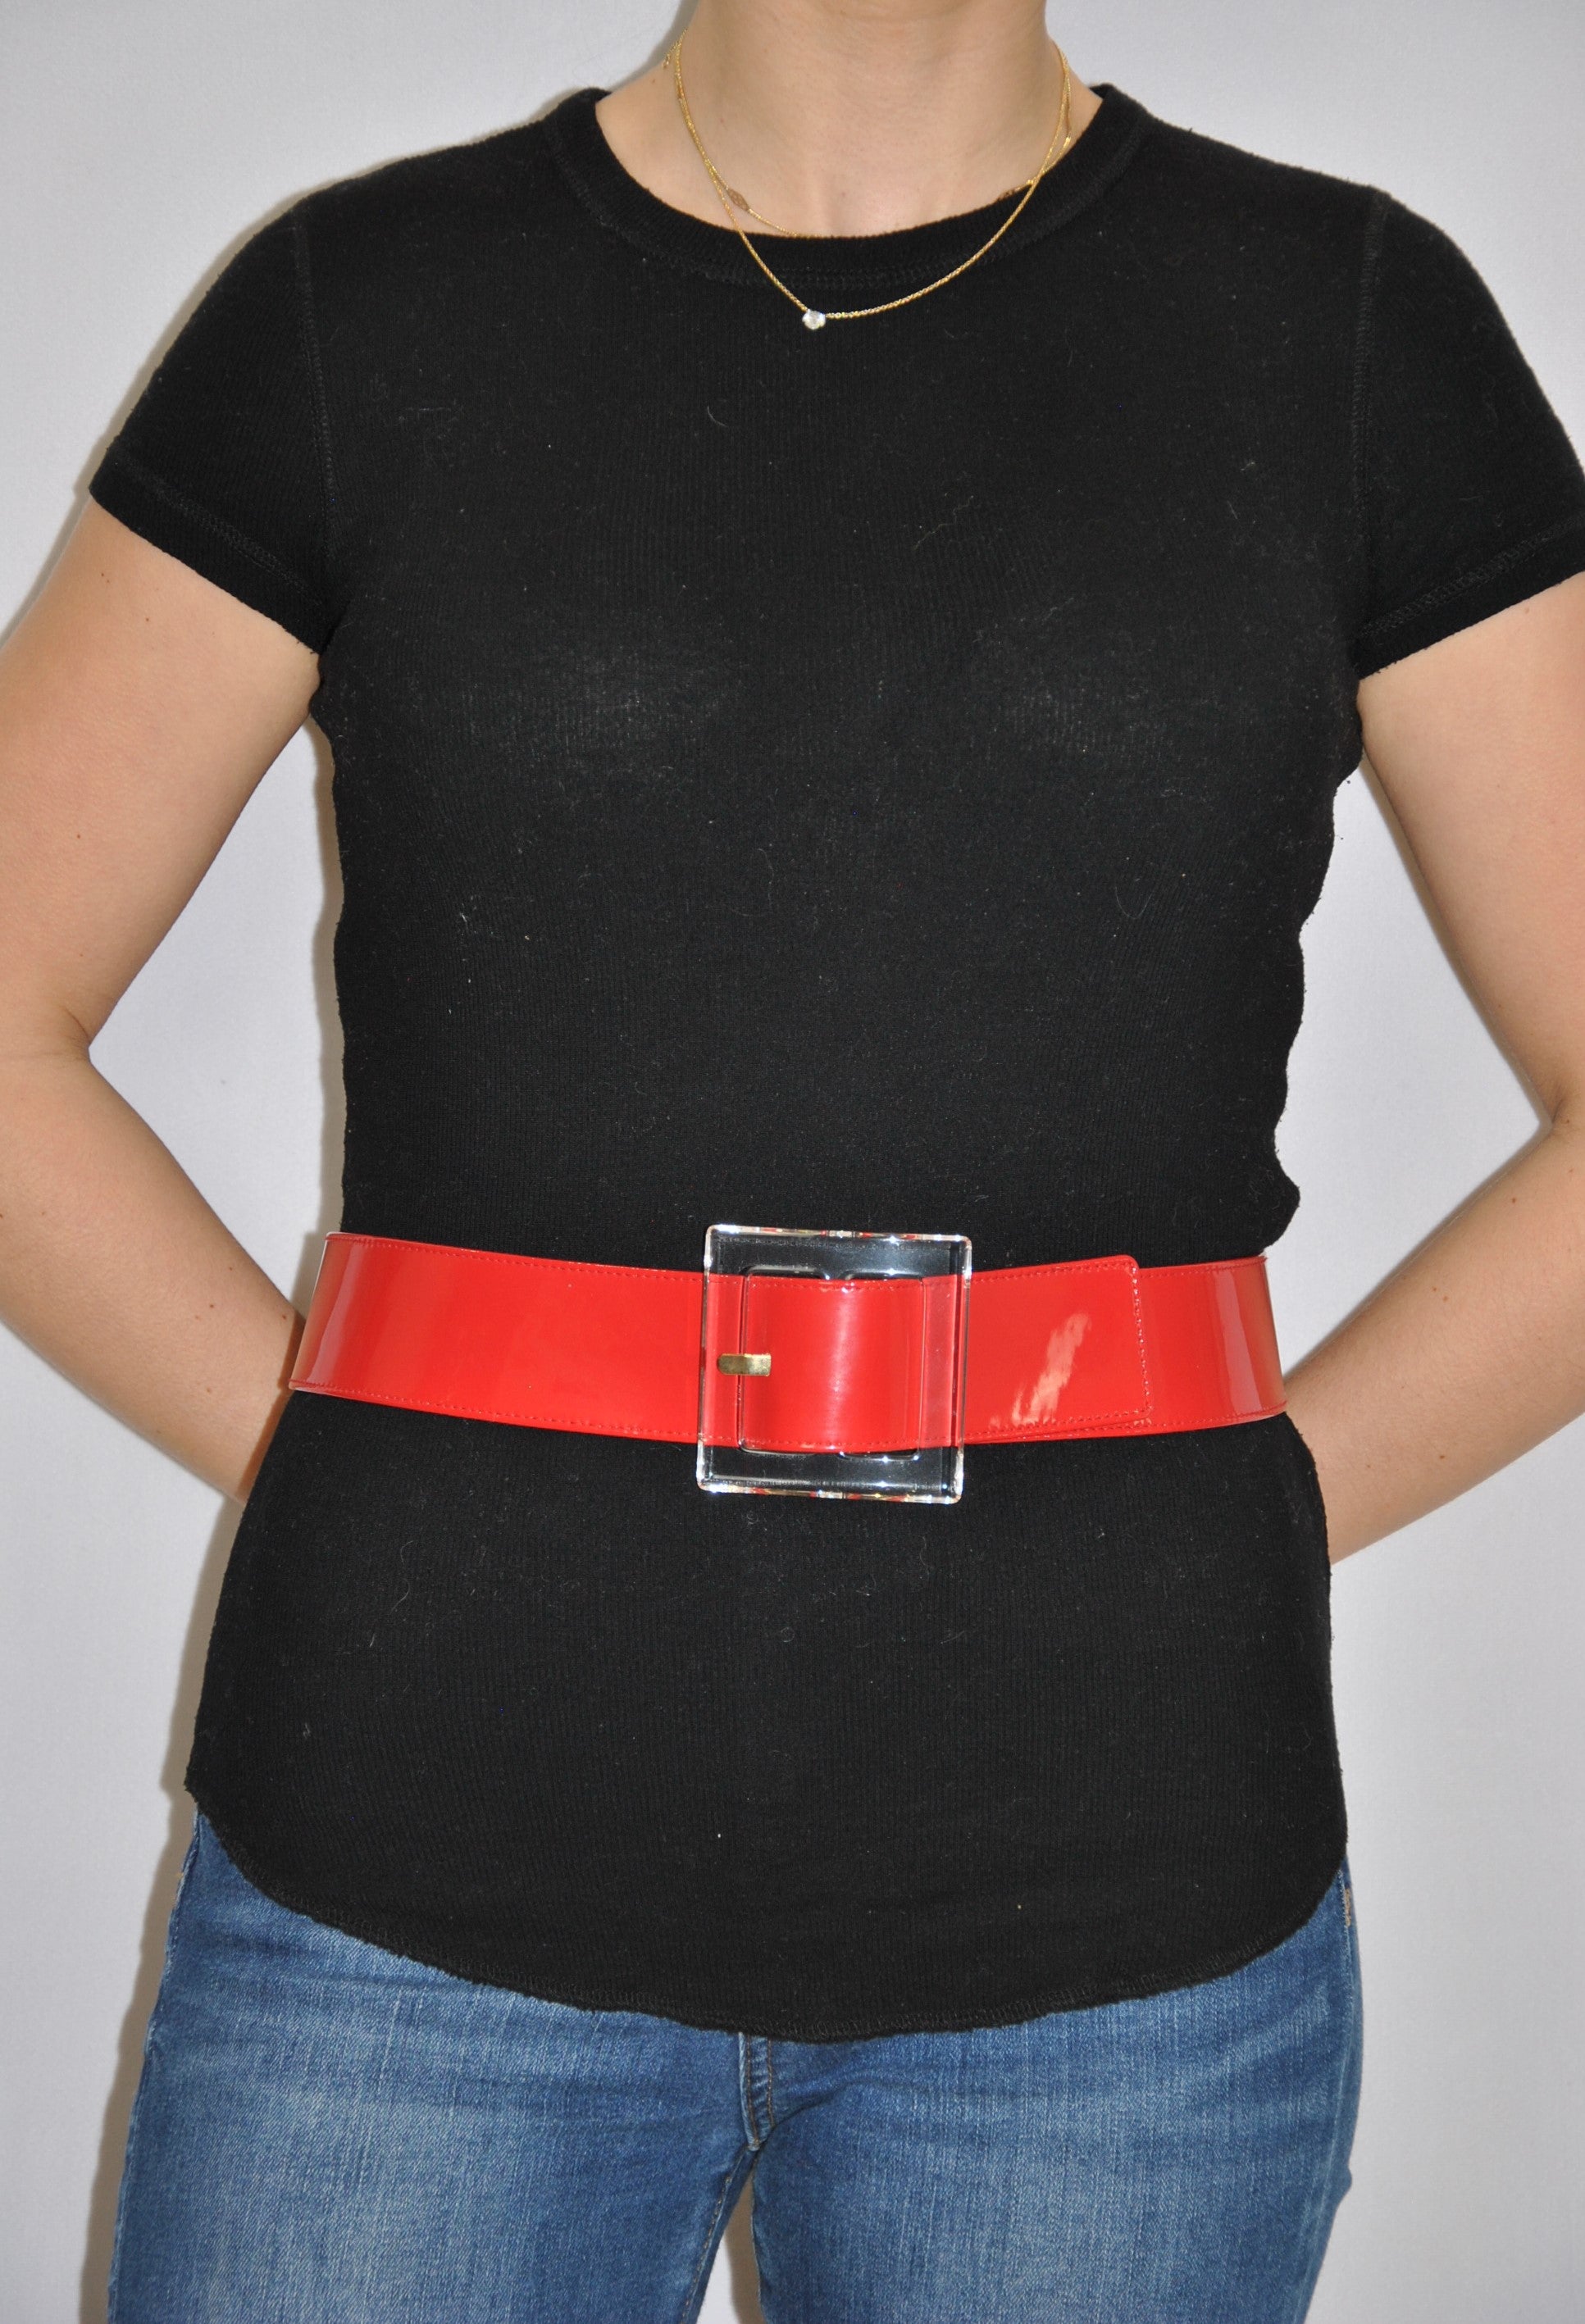 Suzi Roher Patent Leather Belt with Clear Clasp